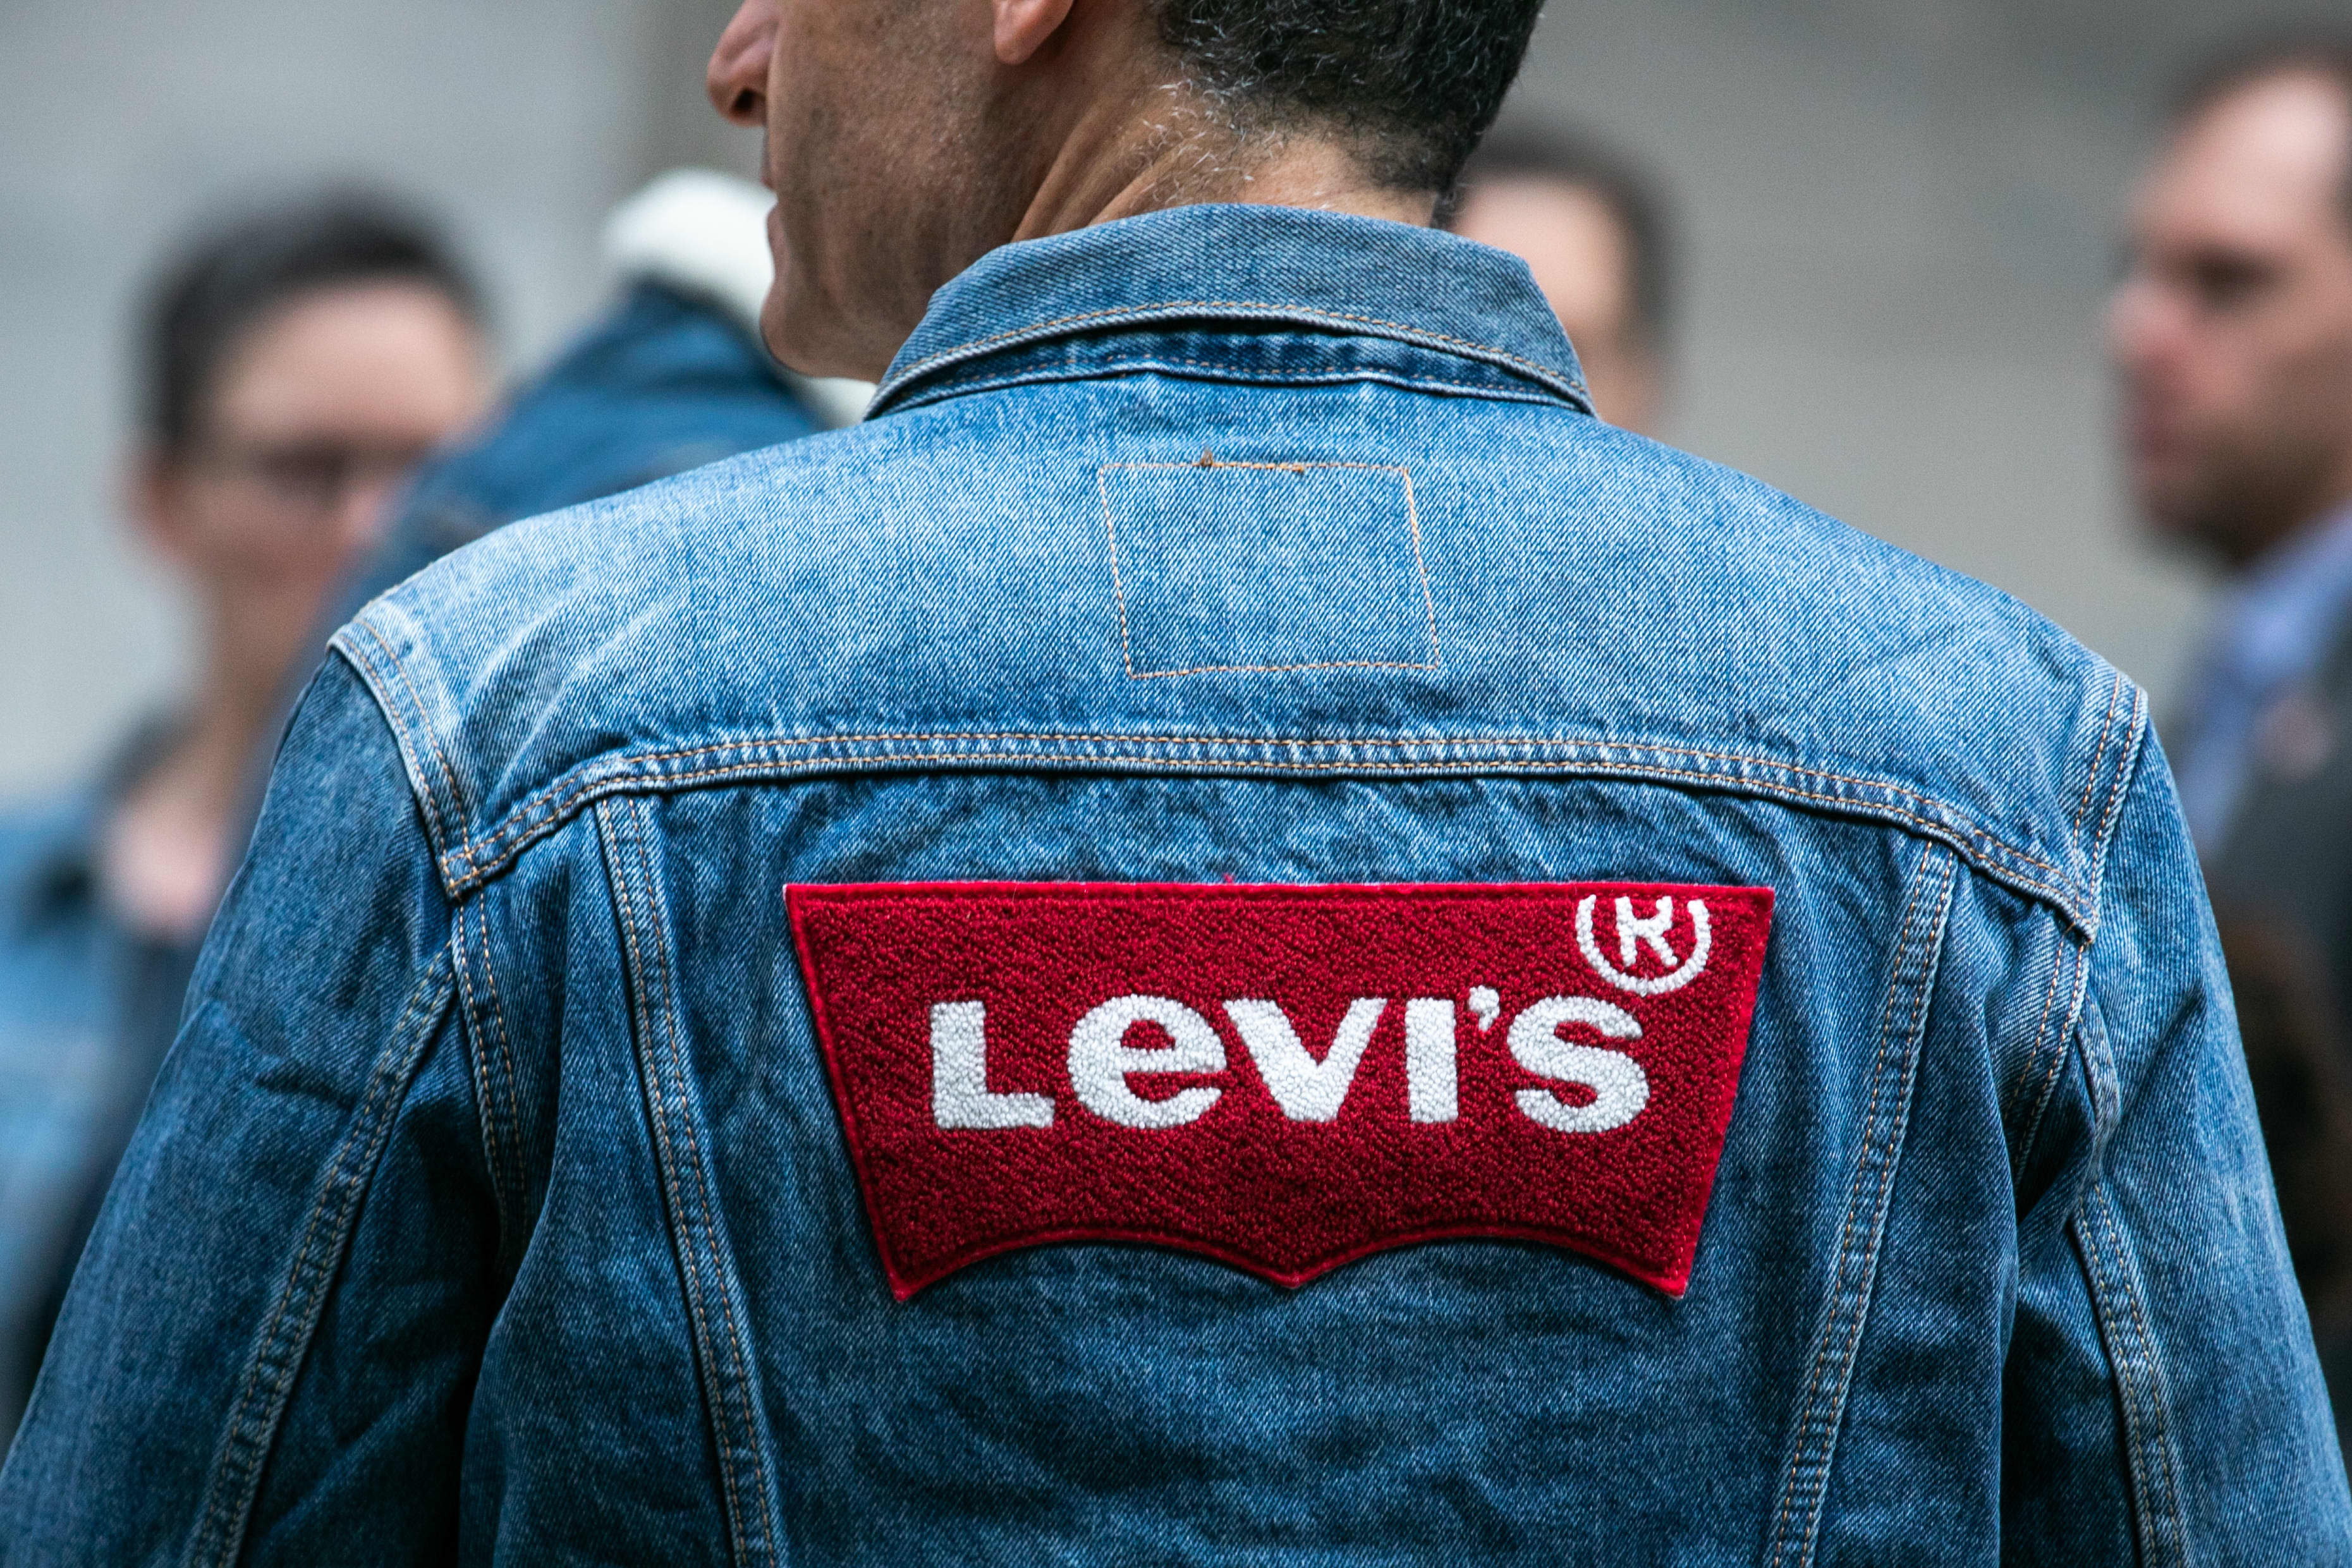 Bank of America downgrades Levi Strauss, says upside is hard to see with discounts and sliding denim demand